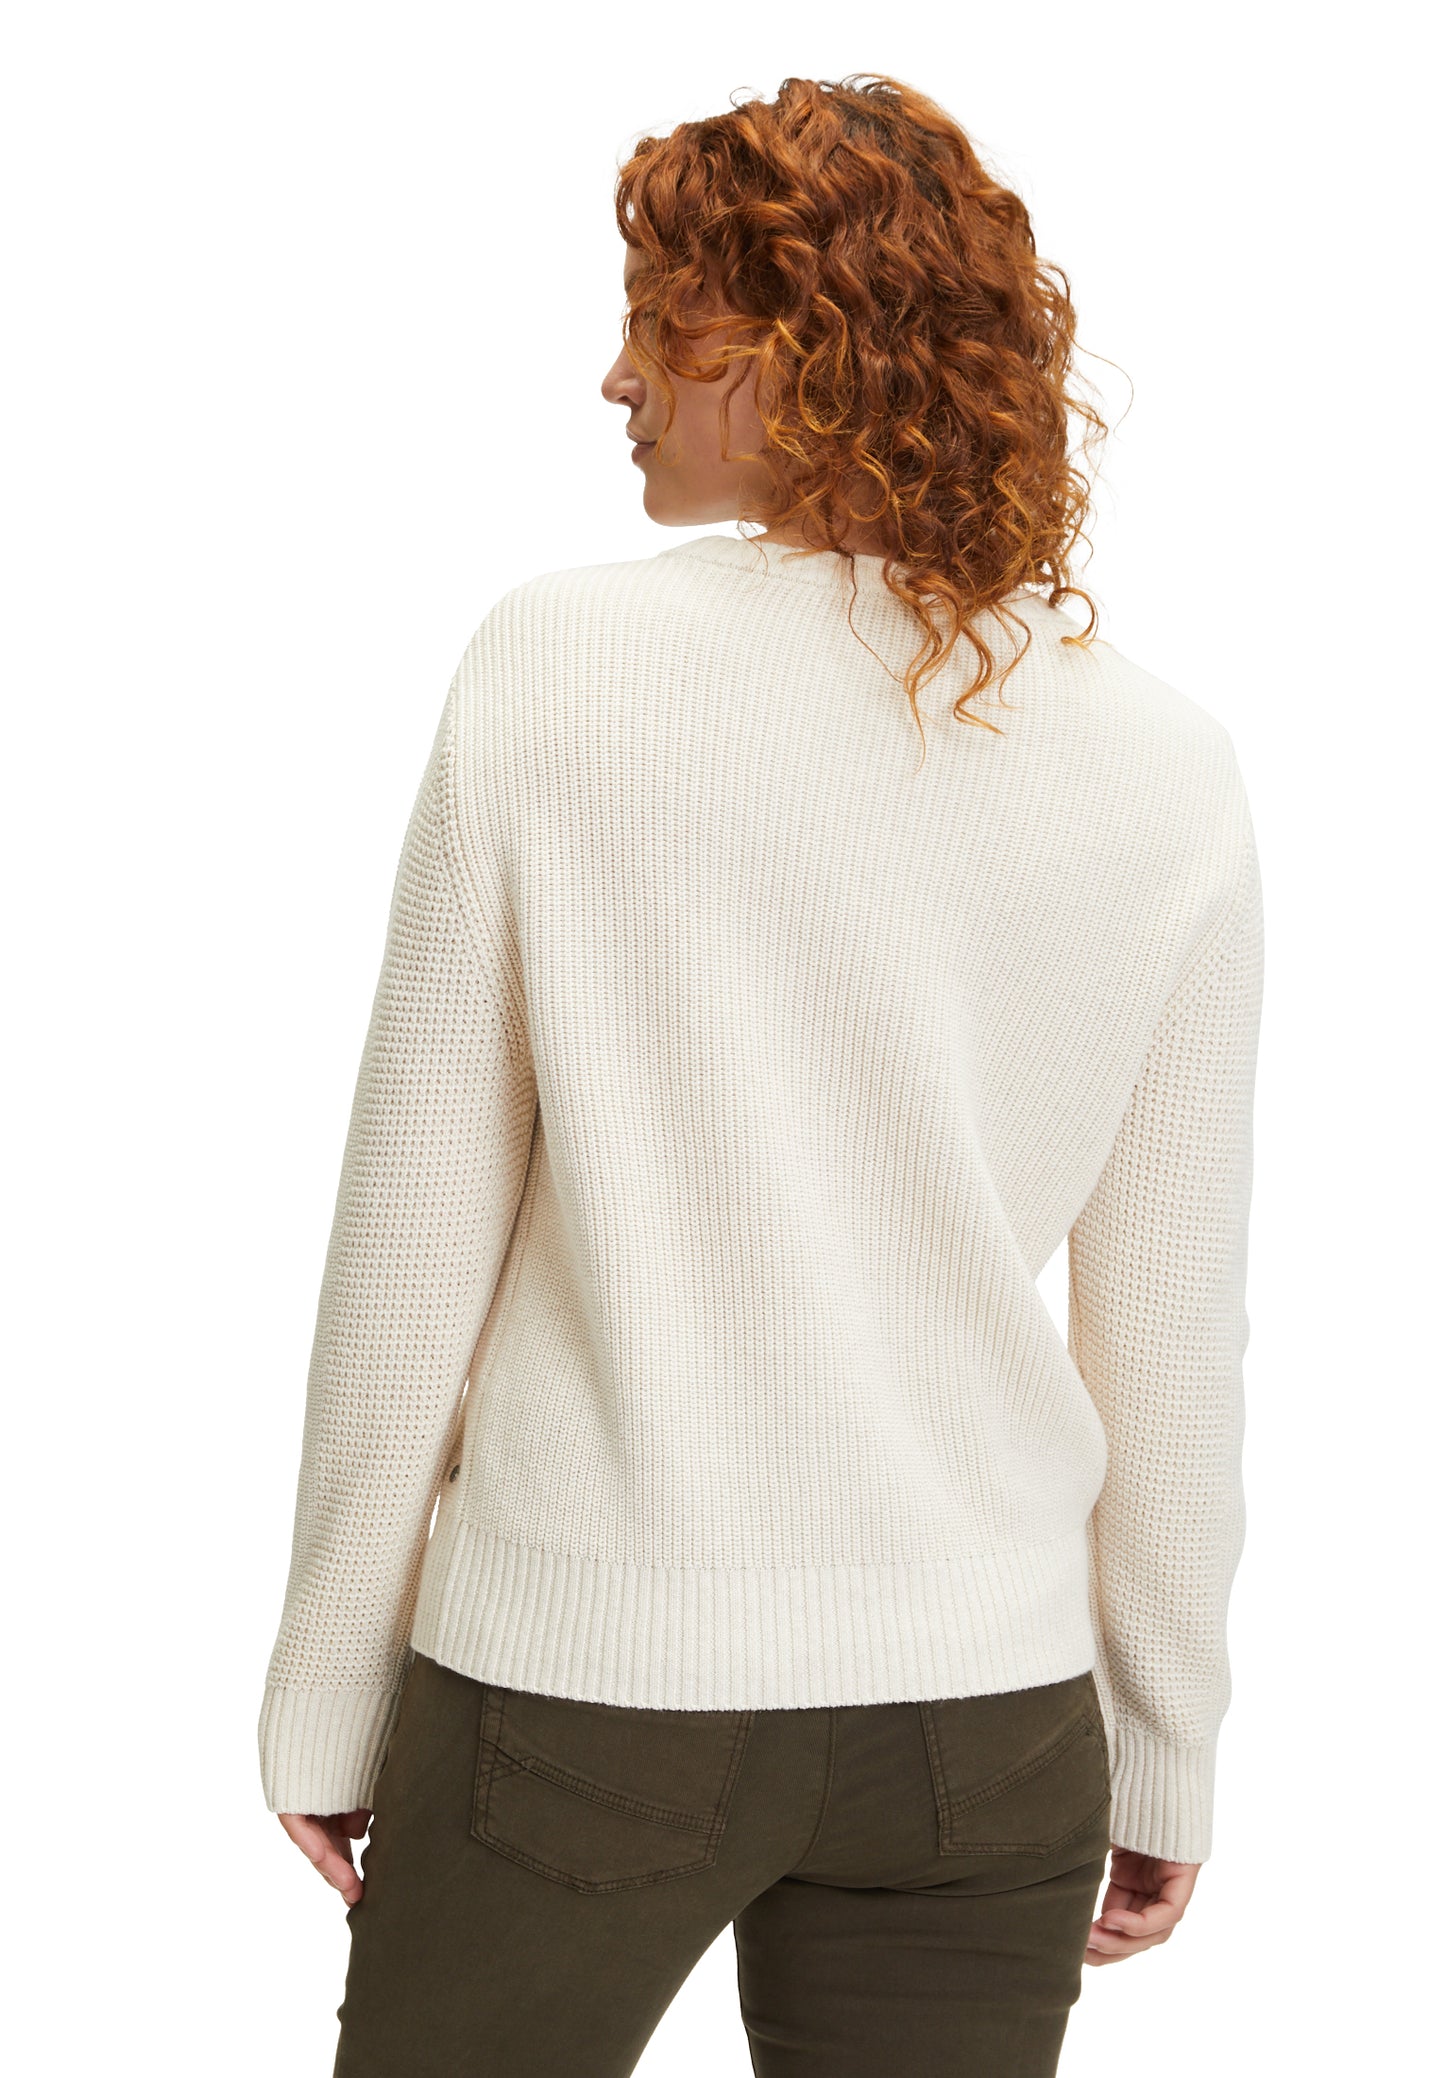 Knitted sweater short 1/1 sleeve